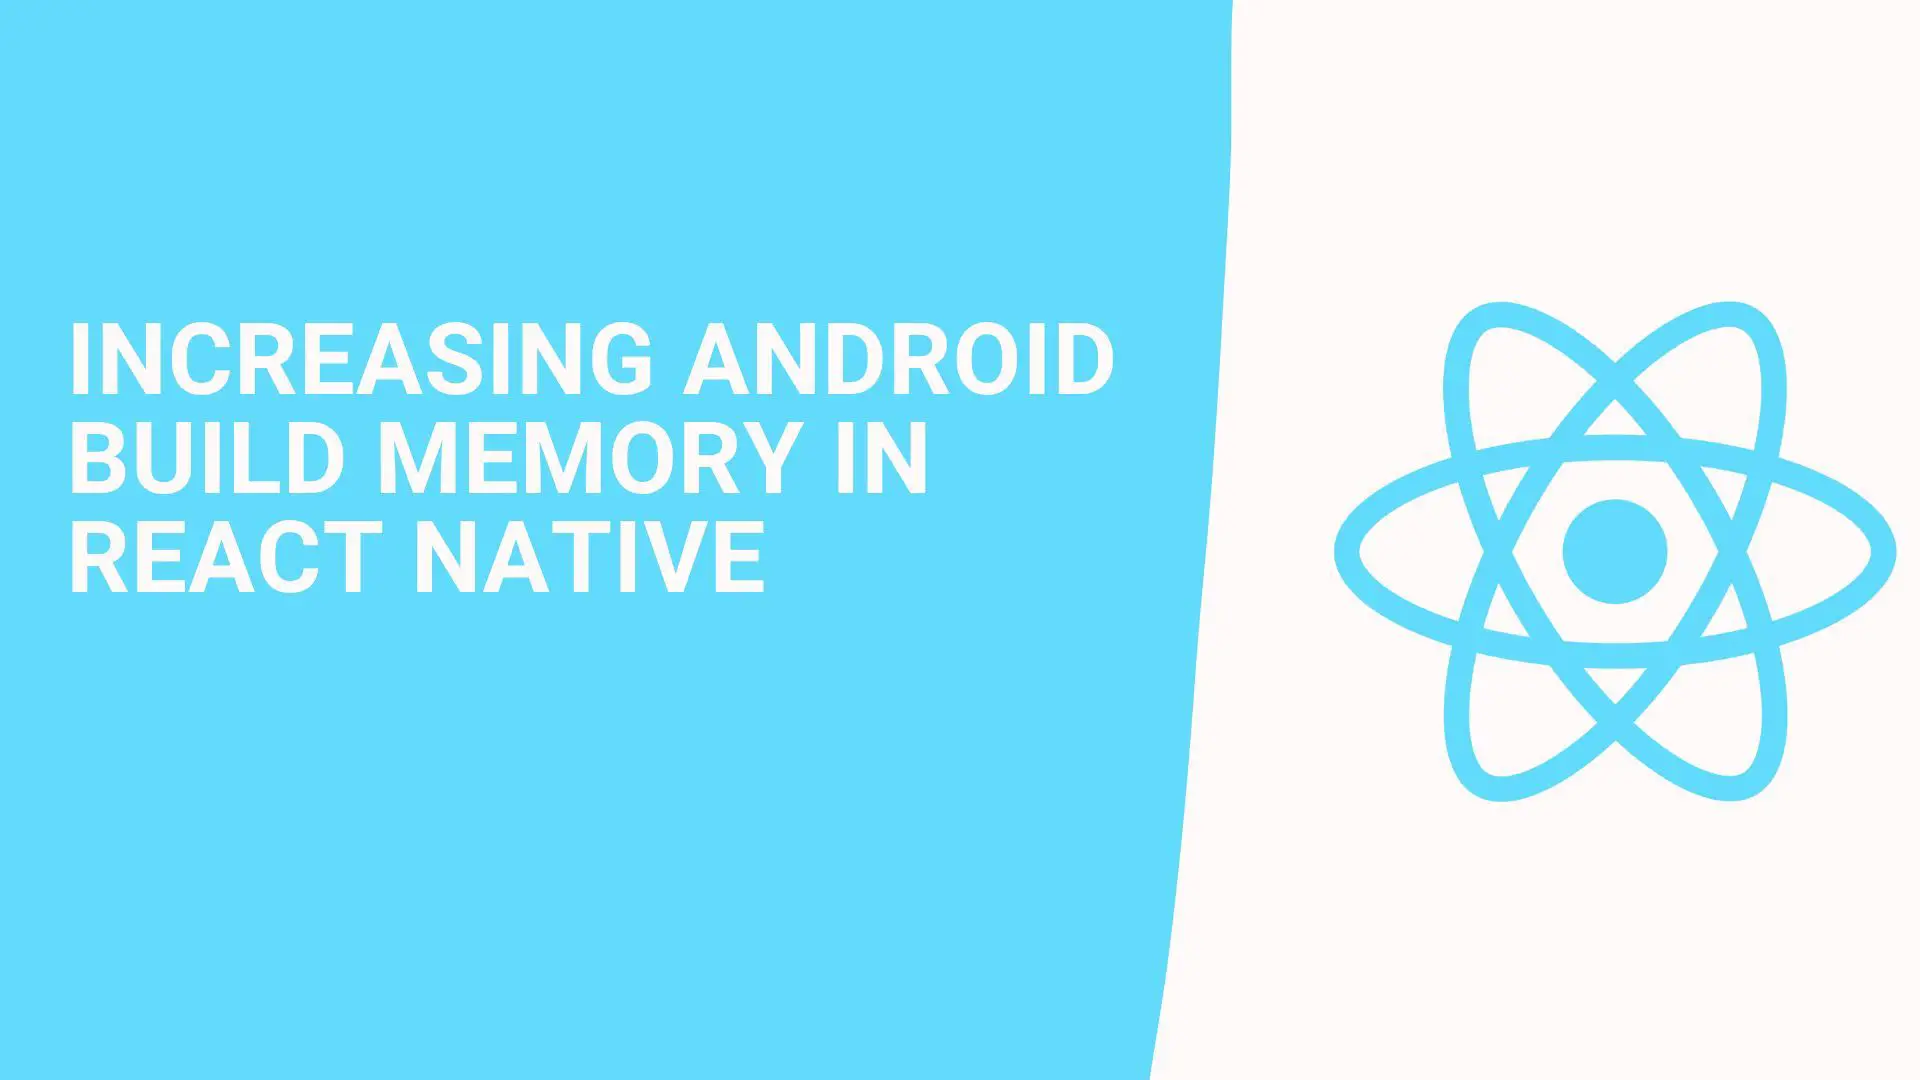 Increasing Android build memory in React Native